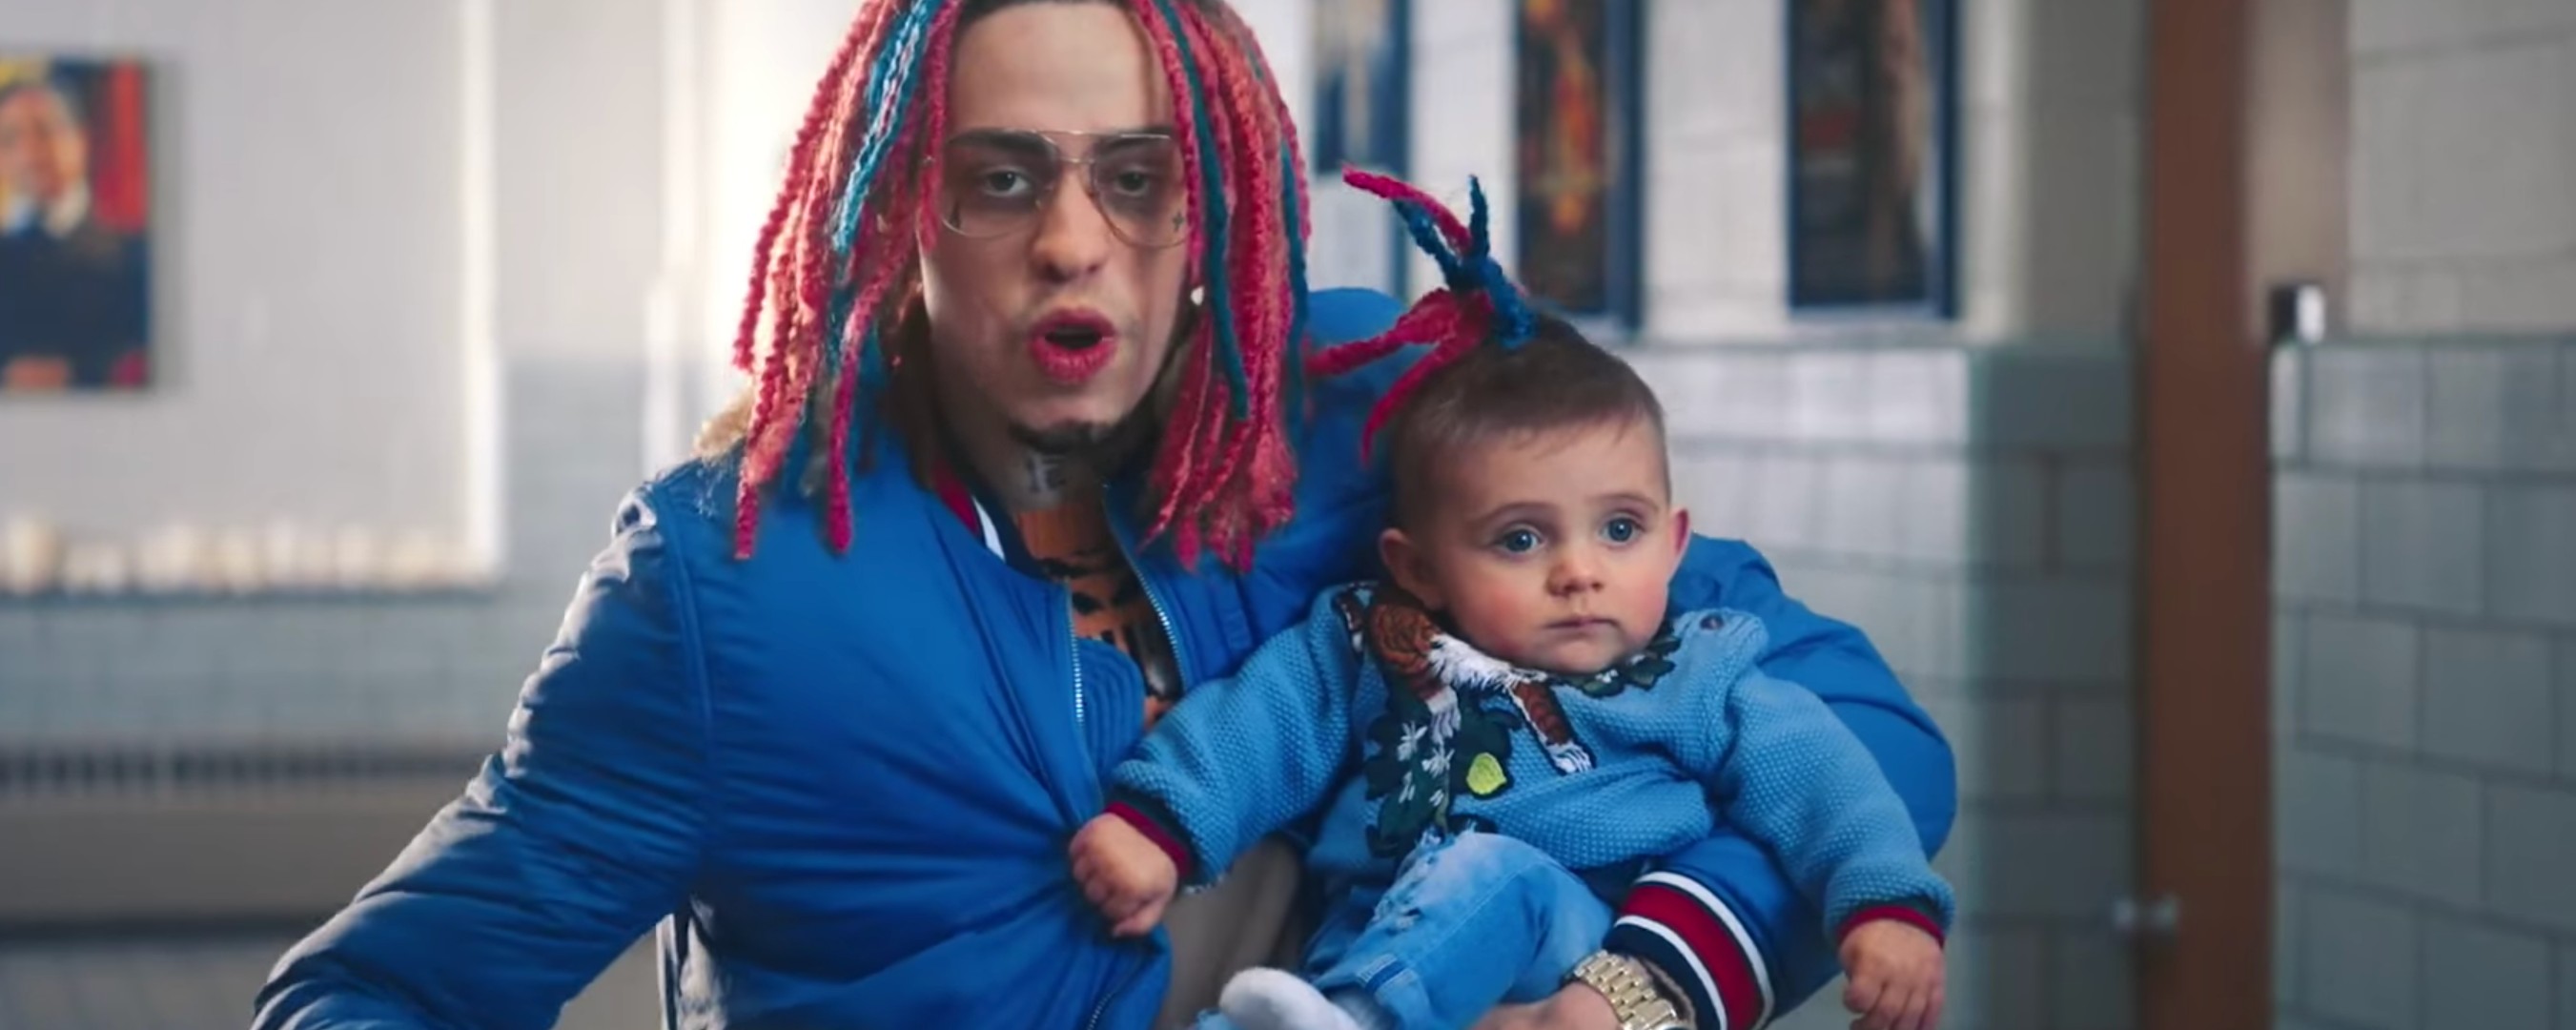 Snl Parodied Lil Pump Again And It Worked Even Better Than Last Time